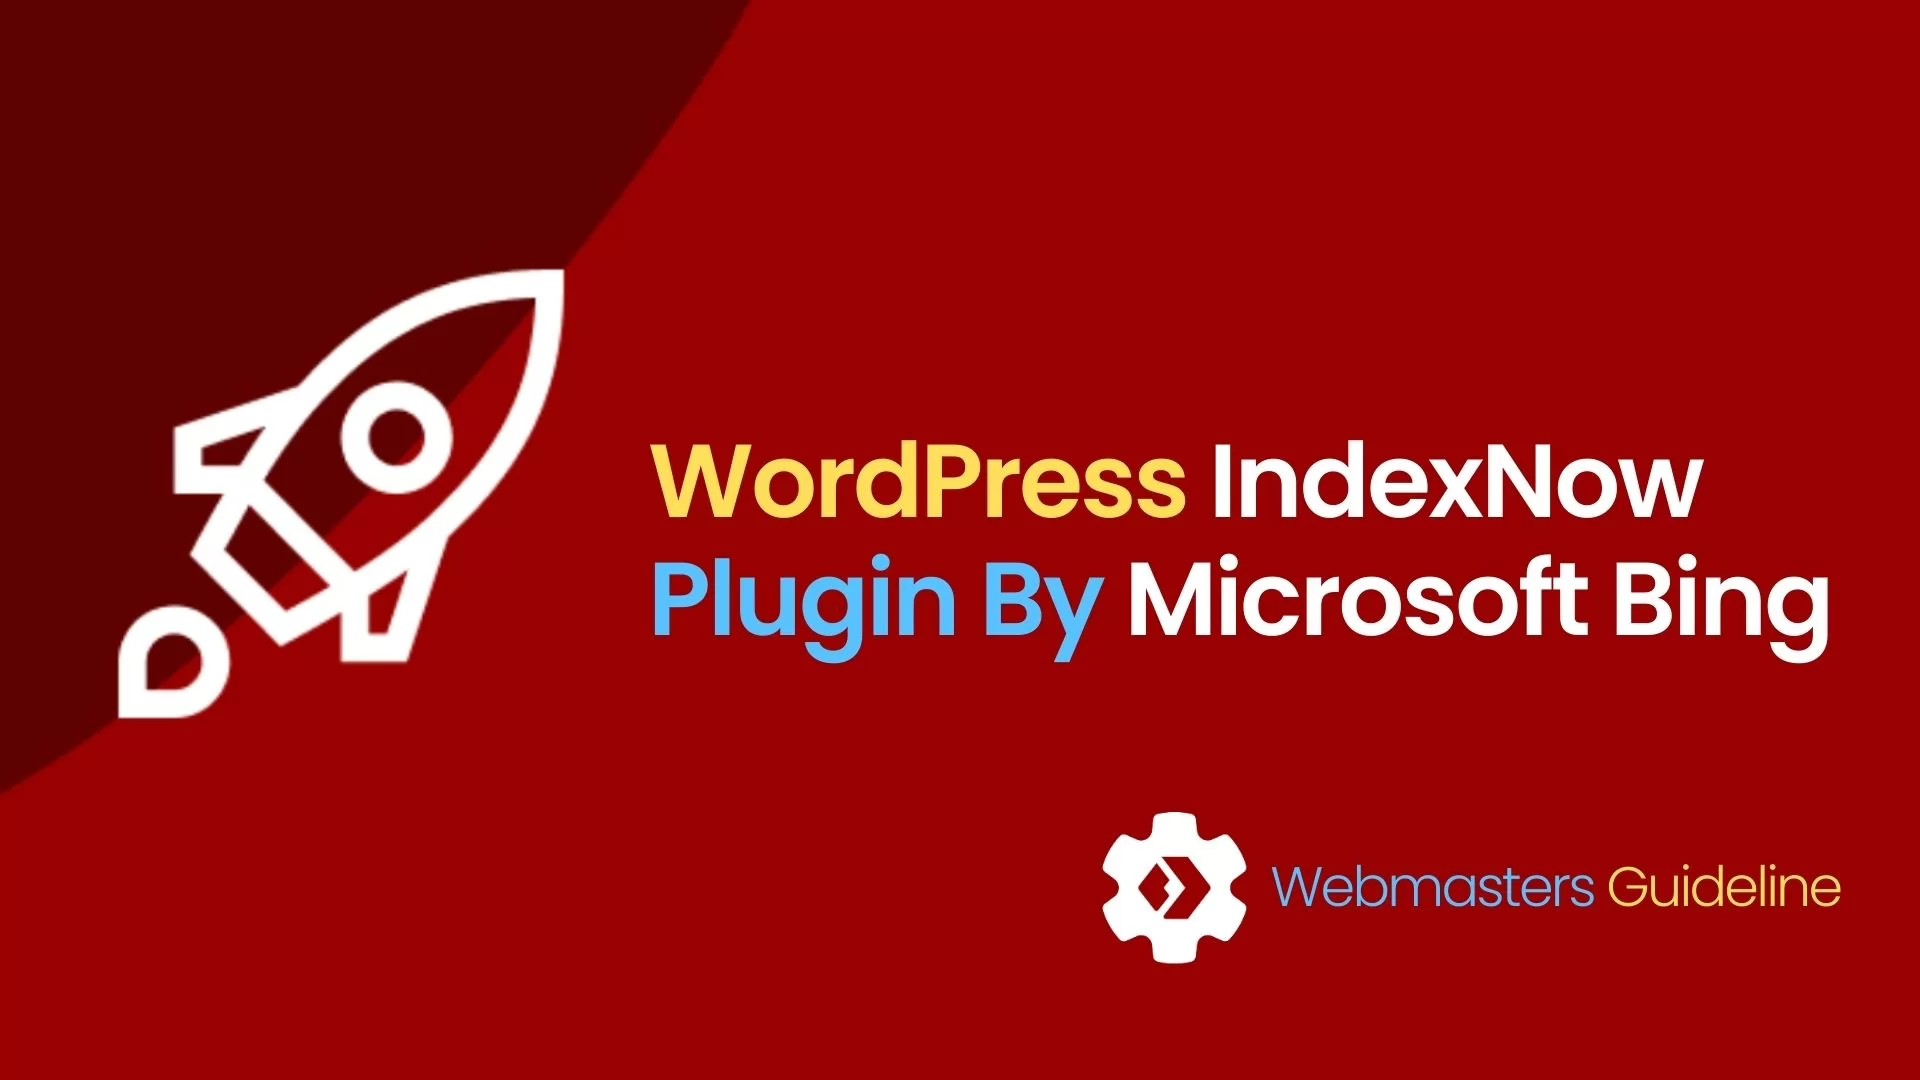 What The WordPress IndexNow Plugin By Microsoft Bing Entails